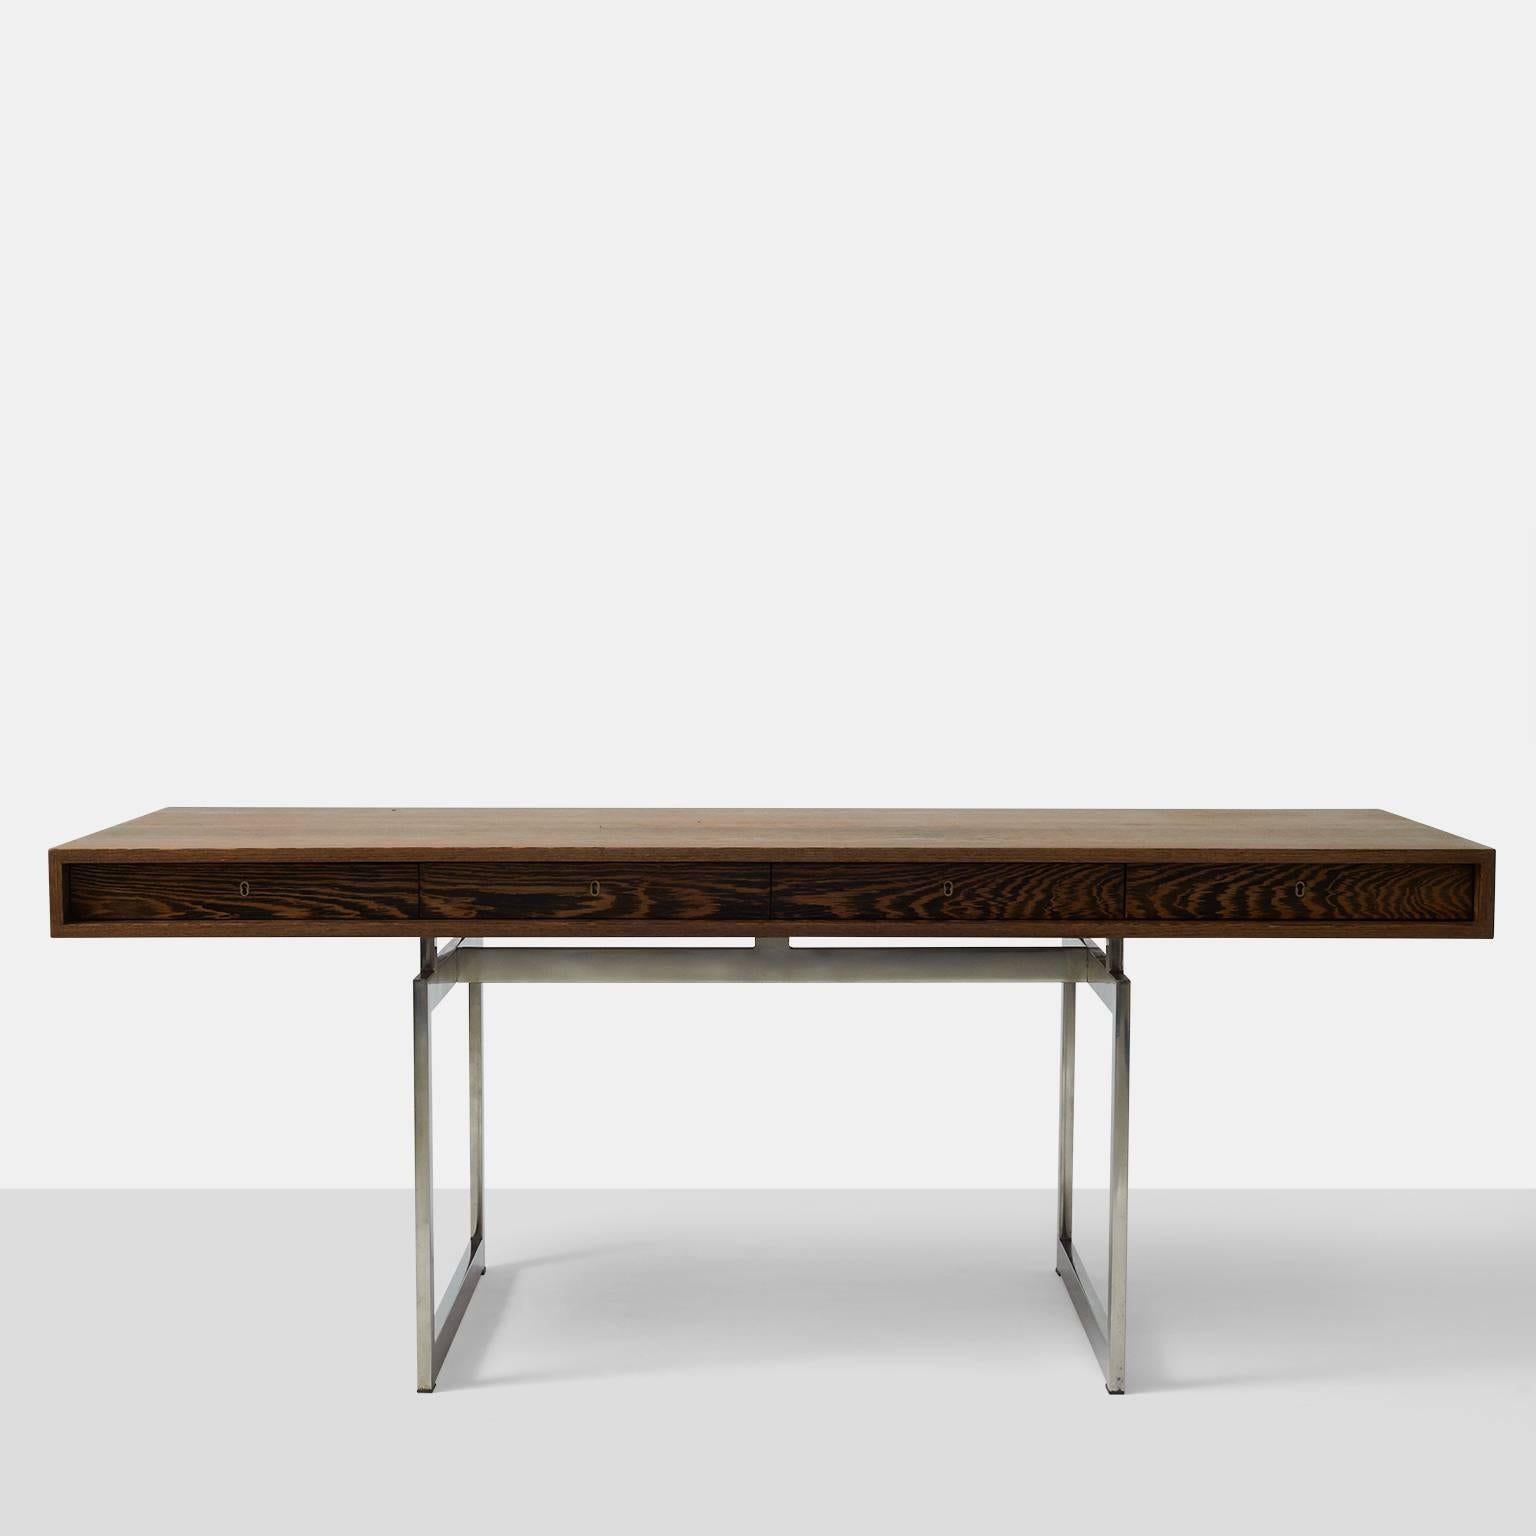 A rare and early Bodil Kjaer desk in wenge by E. Pederson & Sons. The desk has four drawers with a chrome and brass key. Polished chrome-plated steel frame. Signed with applied manufacturer's label.